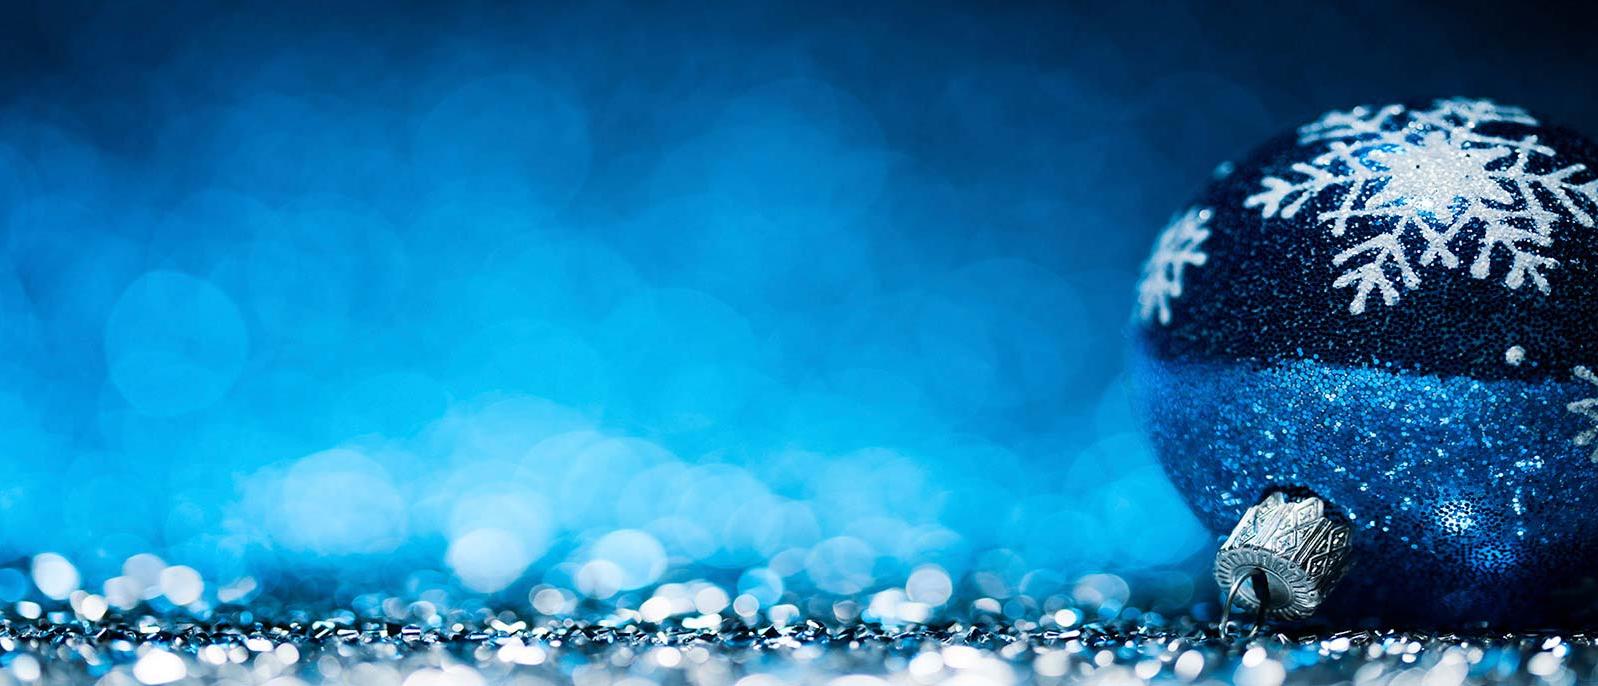 Background Image | Blue Ornament and Glitter